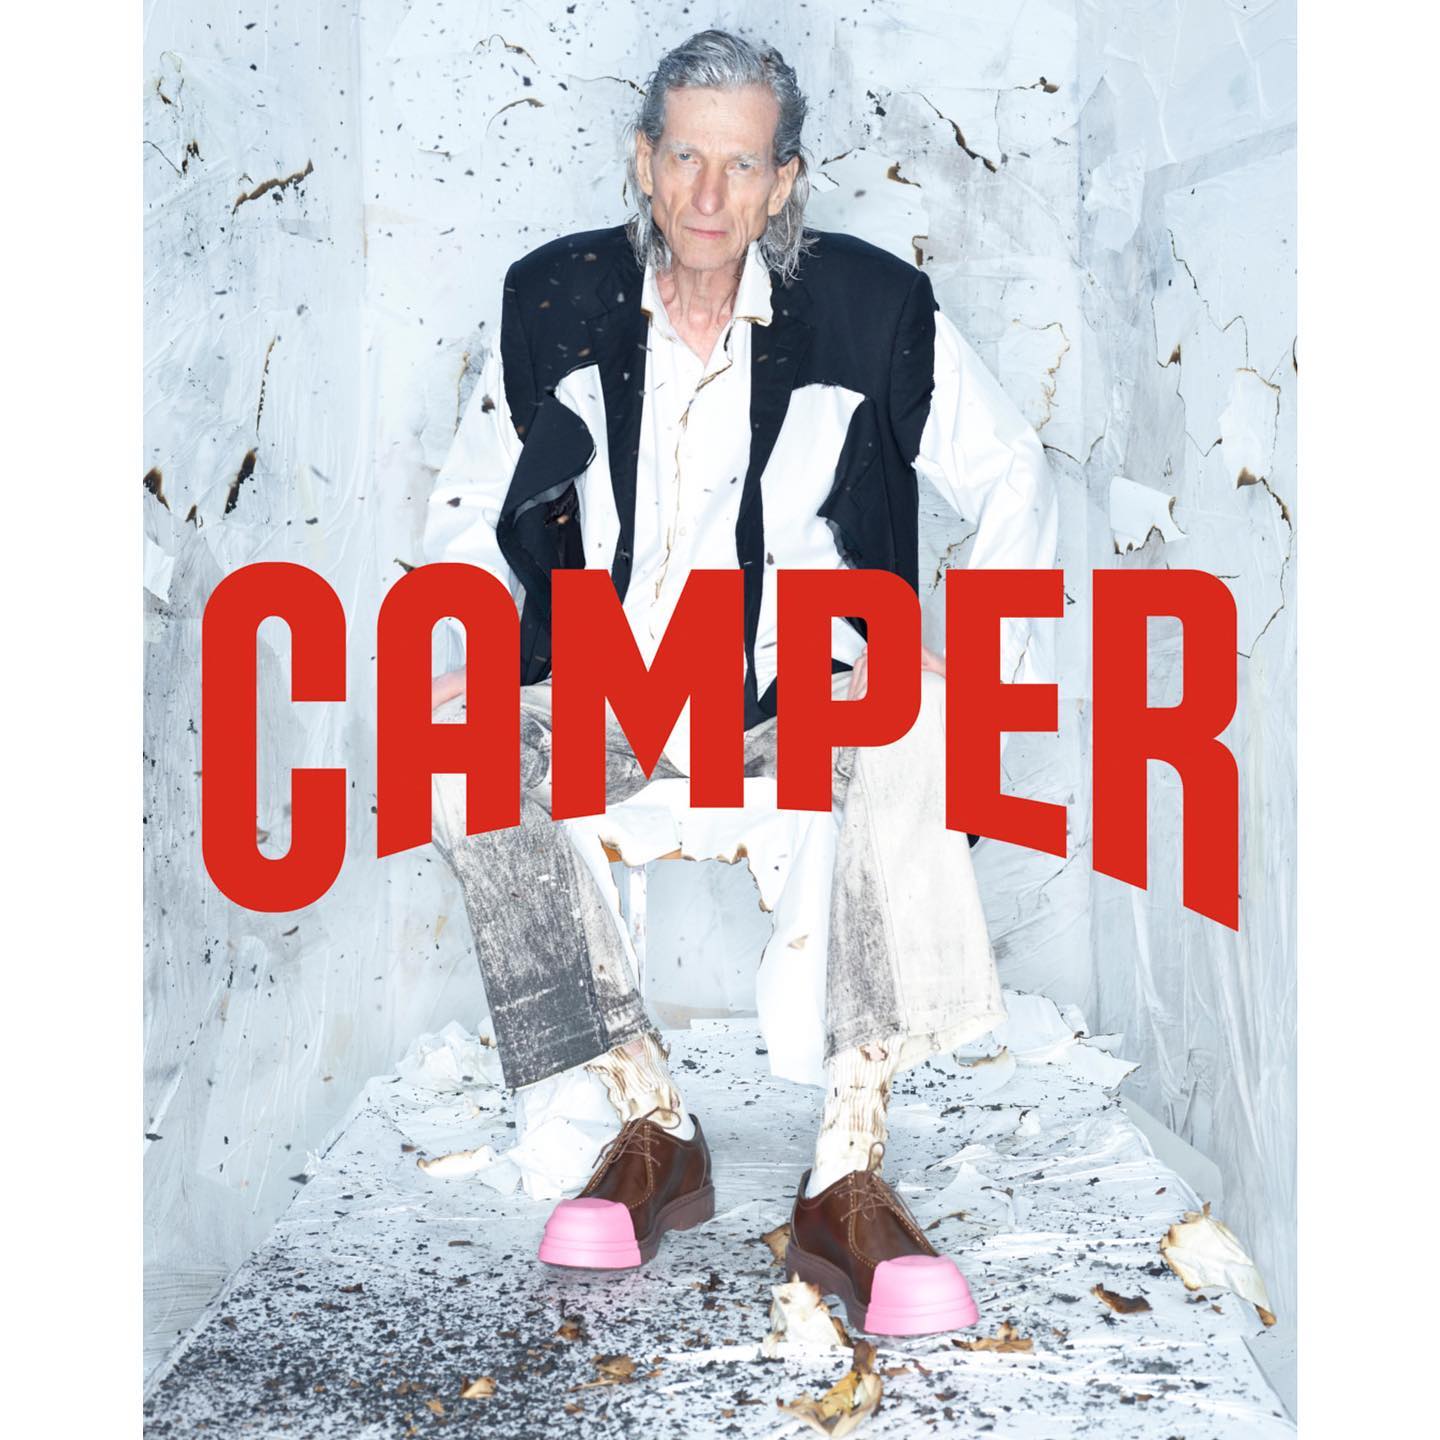 Karl-Ernst for Camper SS23 Campaign. Photography by Tom Blesch, styling by Marialena Morelli, hair by Pablo Kuemin, make-up David Koppelaar, casting by Alexis Ocón.